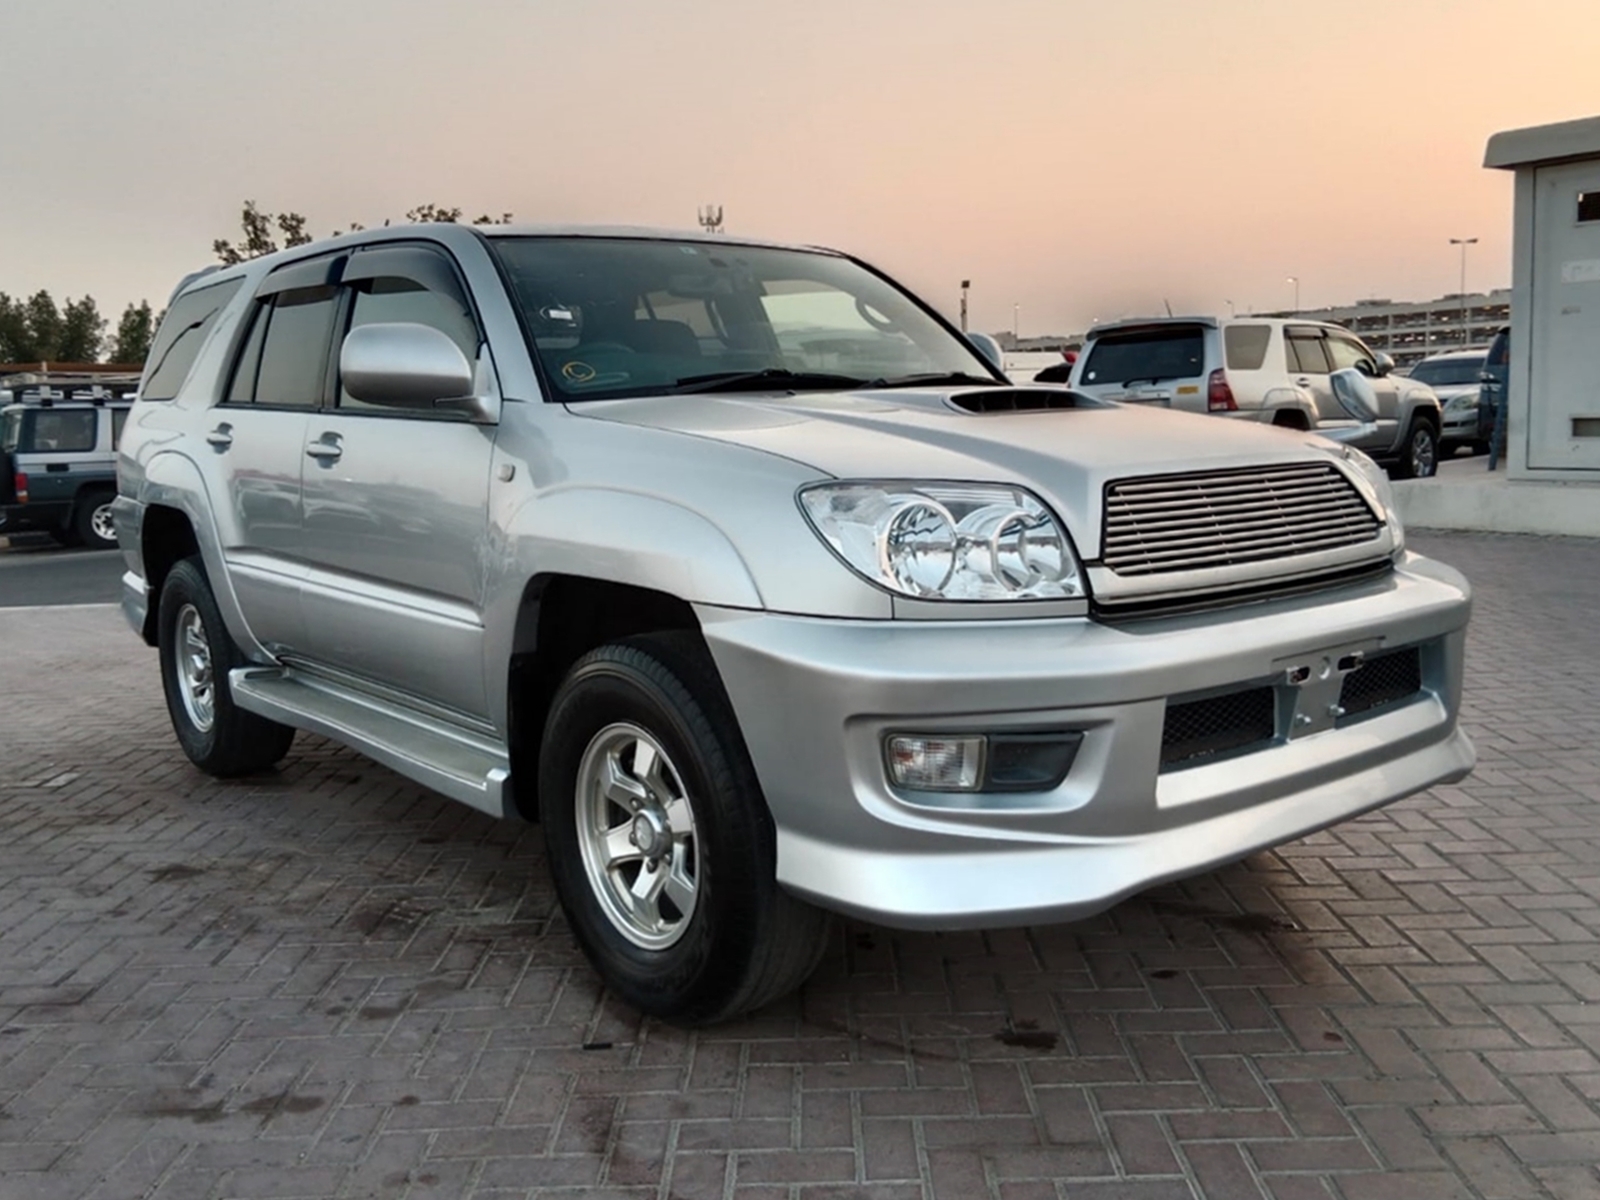 02627 TOYOTA  HILUX SURF 3.0 4WD A/T SILVER